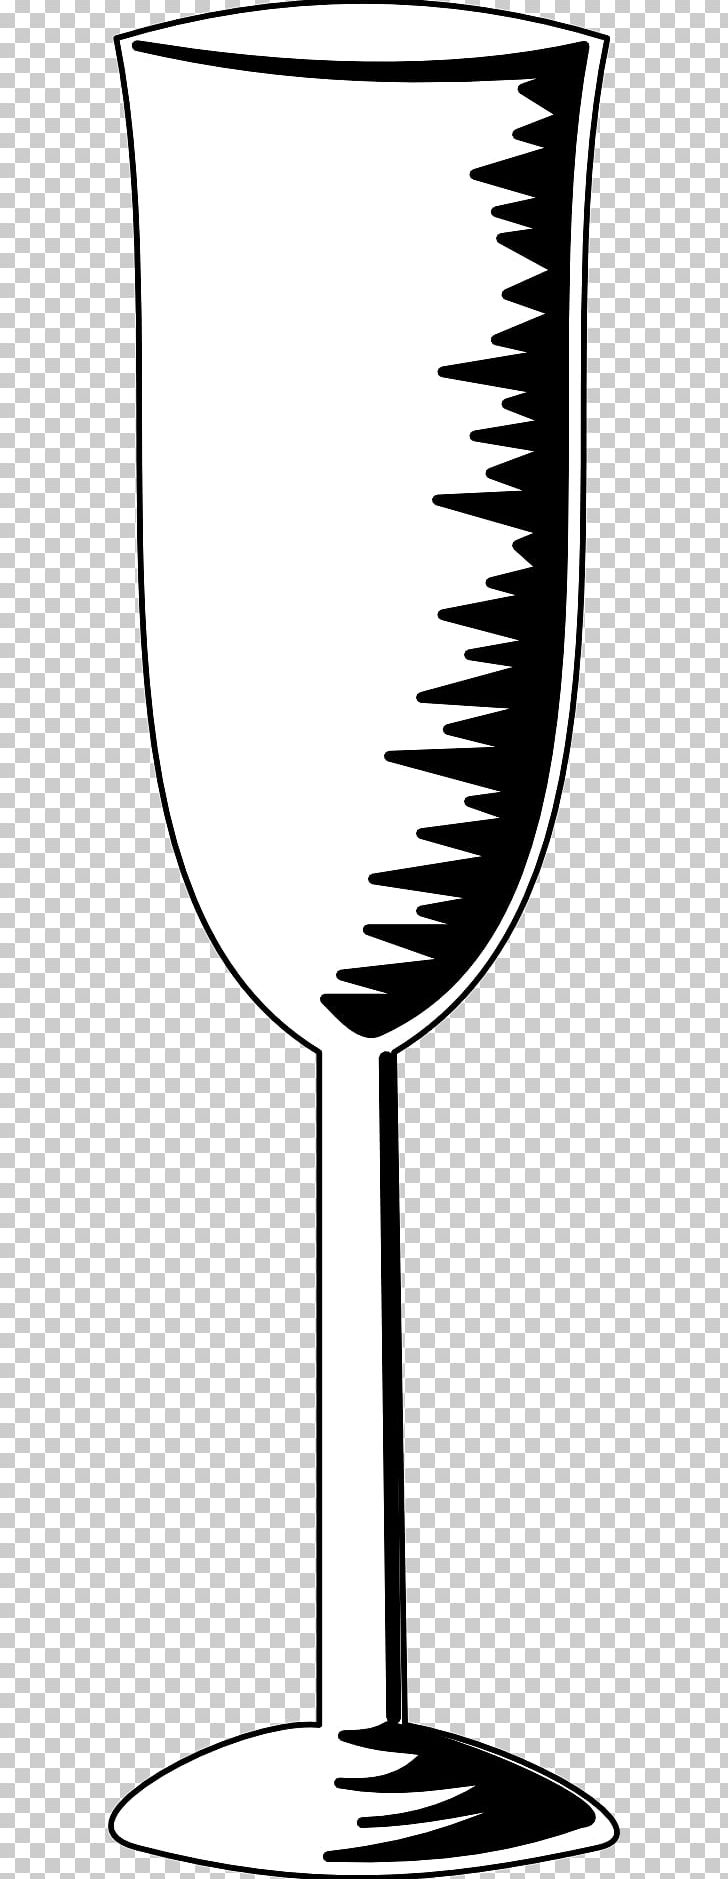 Champagne Glass Margarita PNG, Clipart, Area, Black And White, Bottle, Champagne, Champagne Glass Free PNG Download